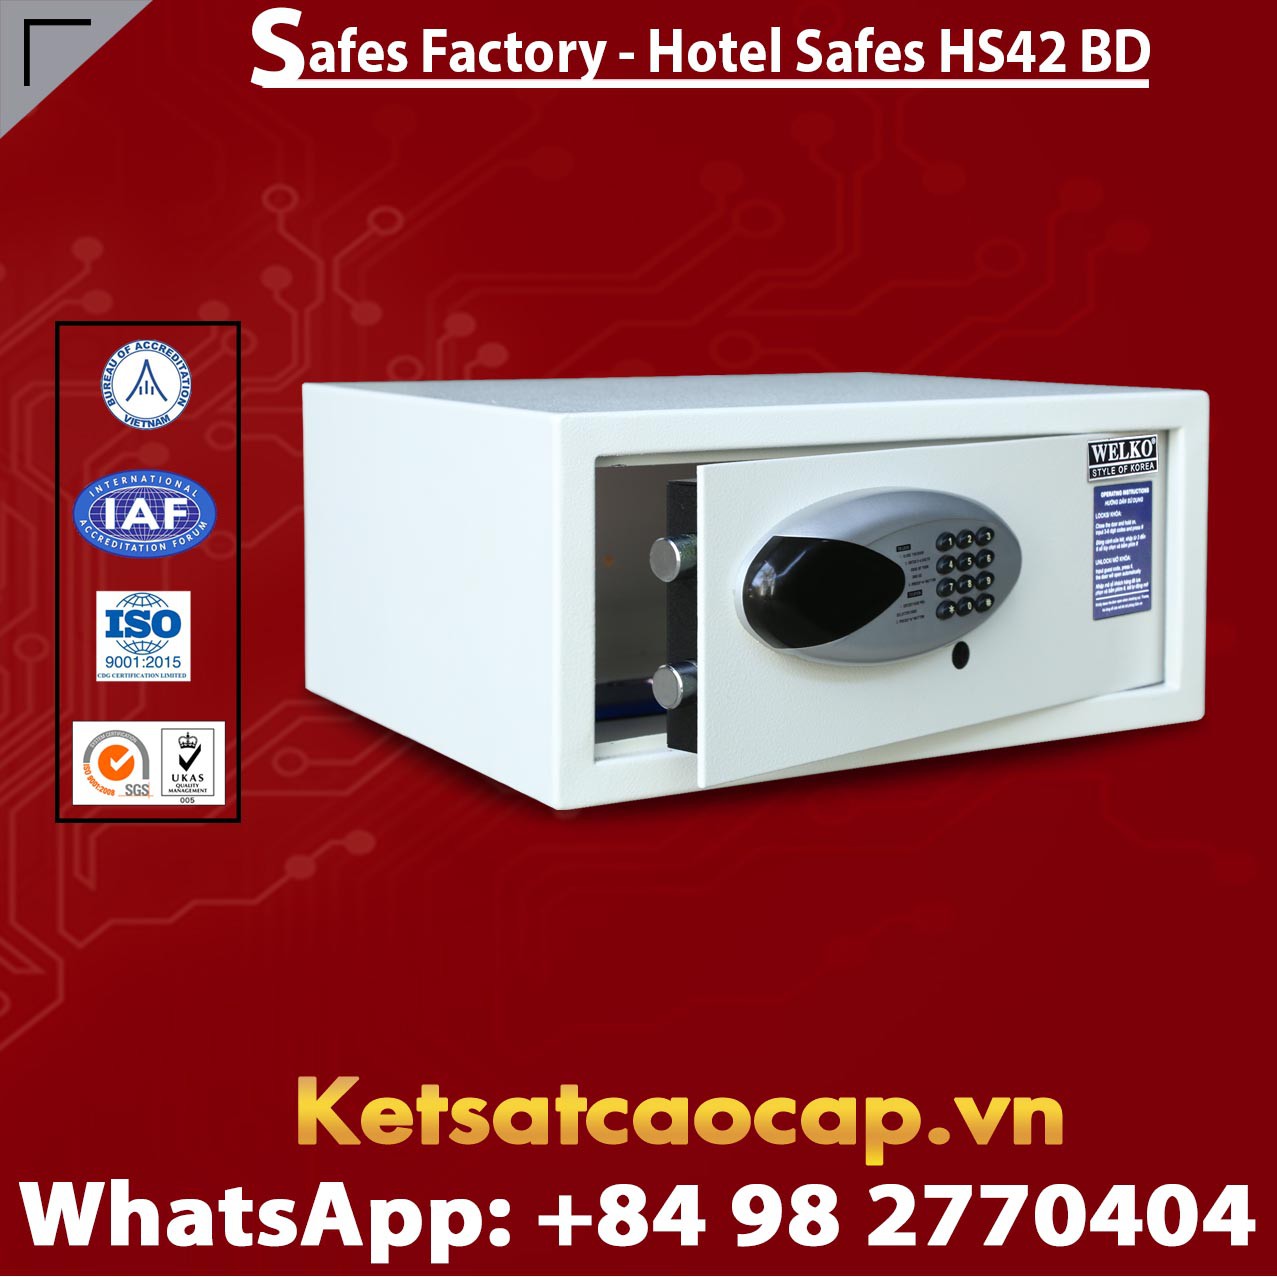 Hotel Safety Deposit Box Suppliers and Exporters‎ WELKO